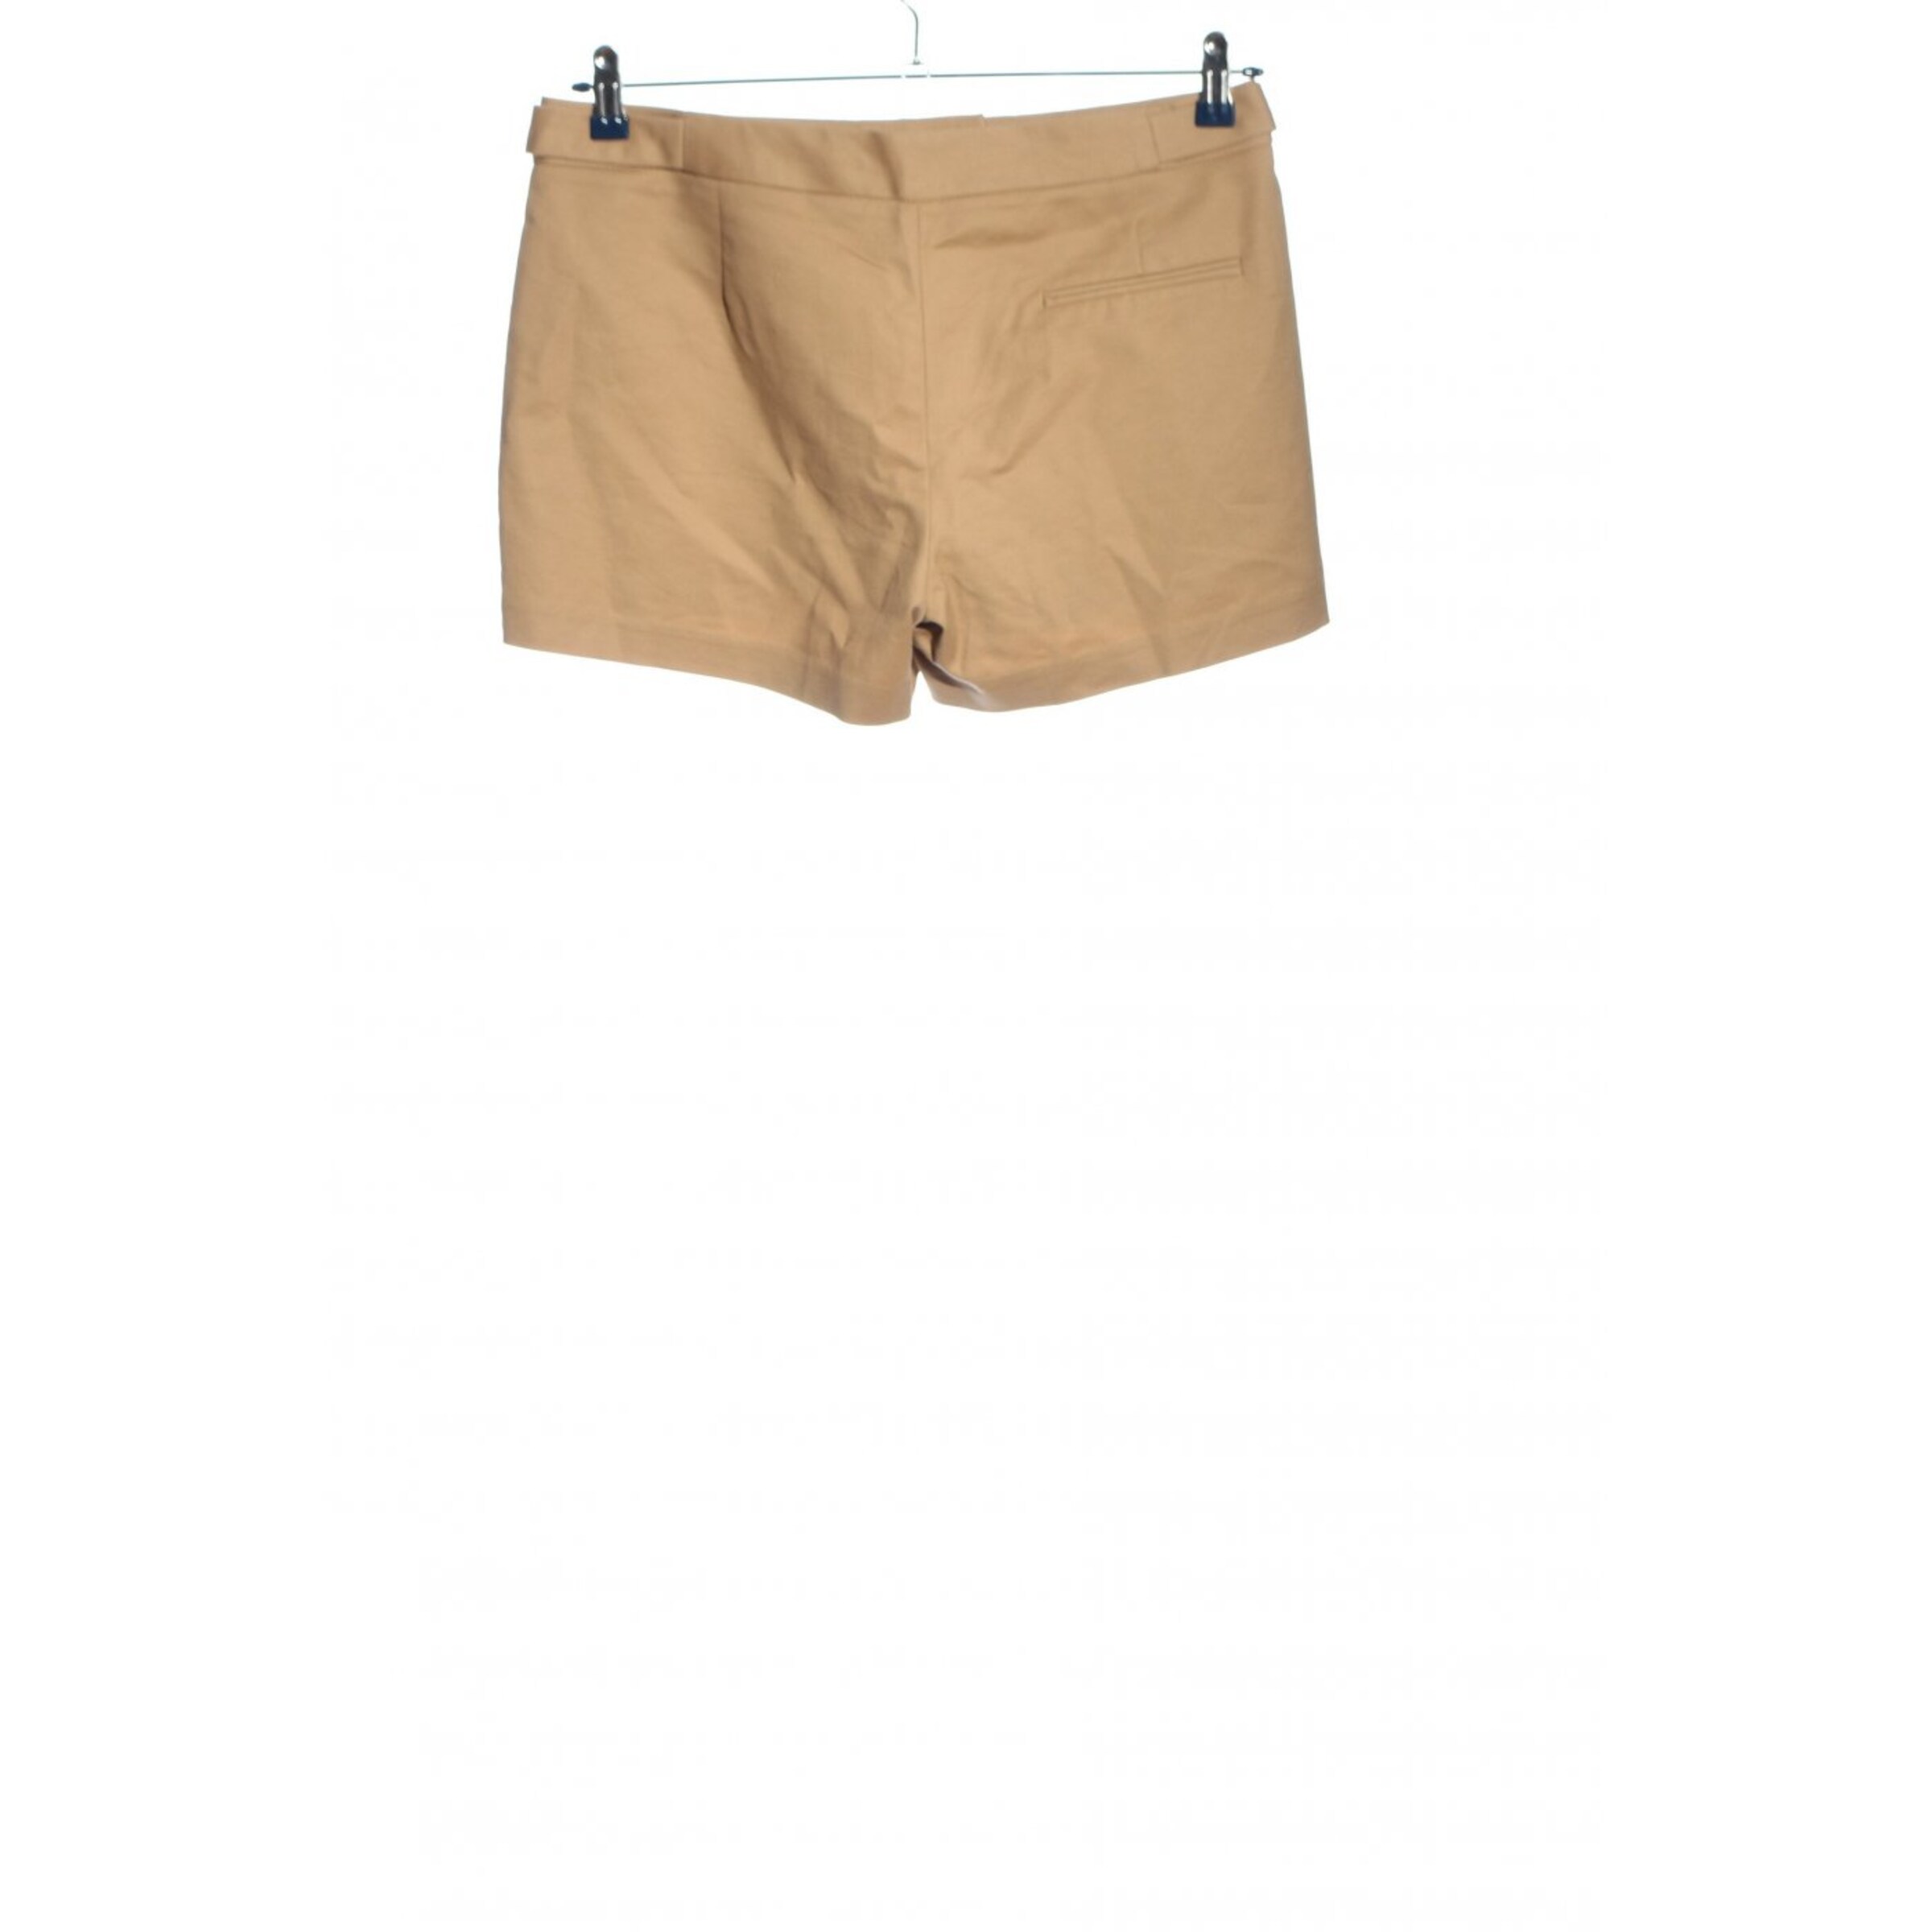 ZARA Hot Pants in M in nude | ABOUT YOU